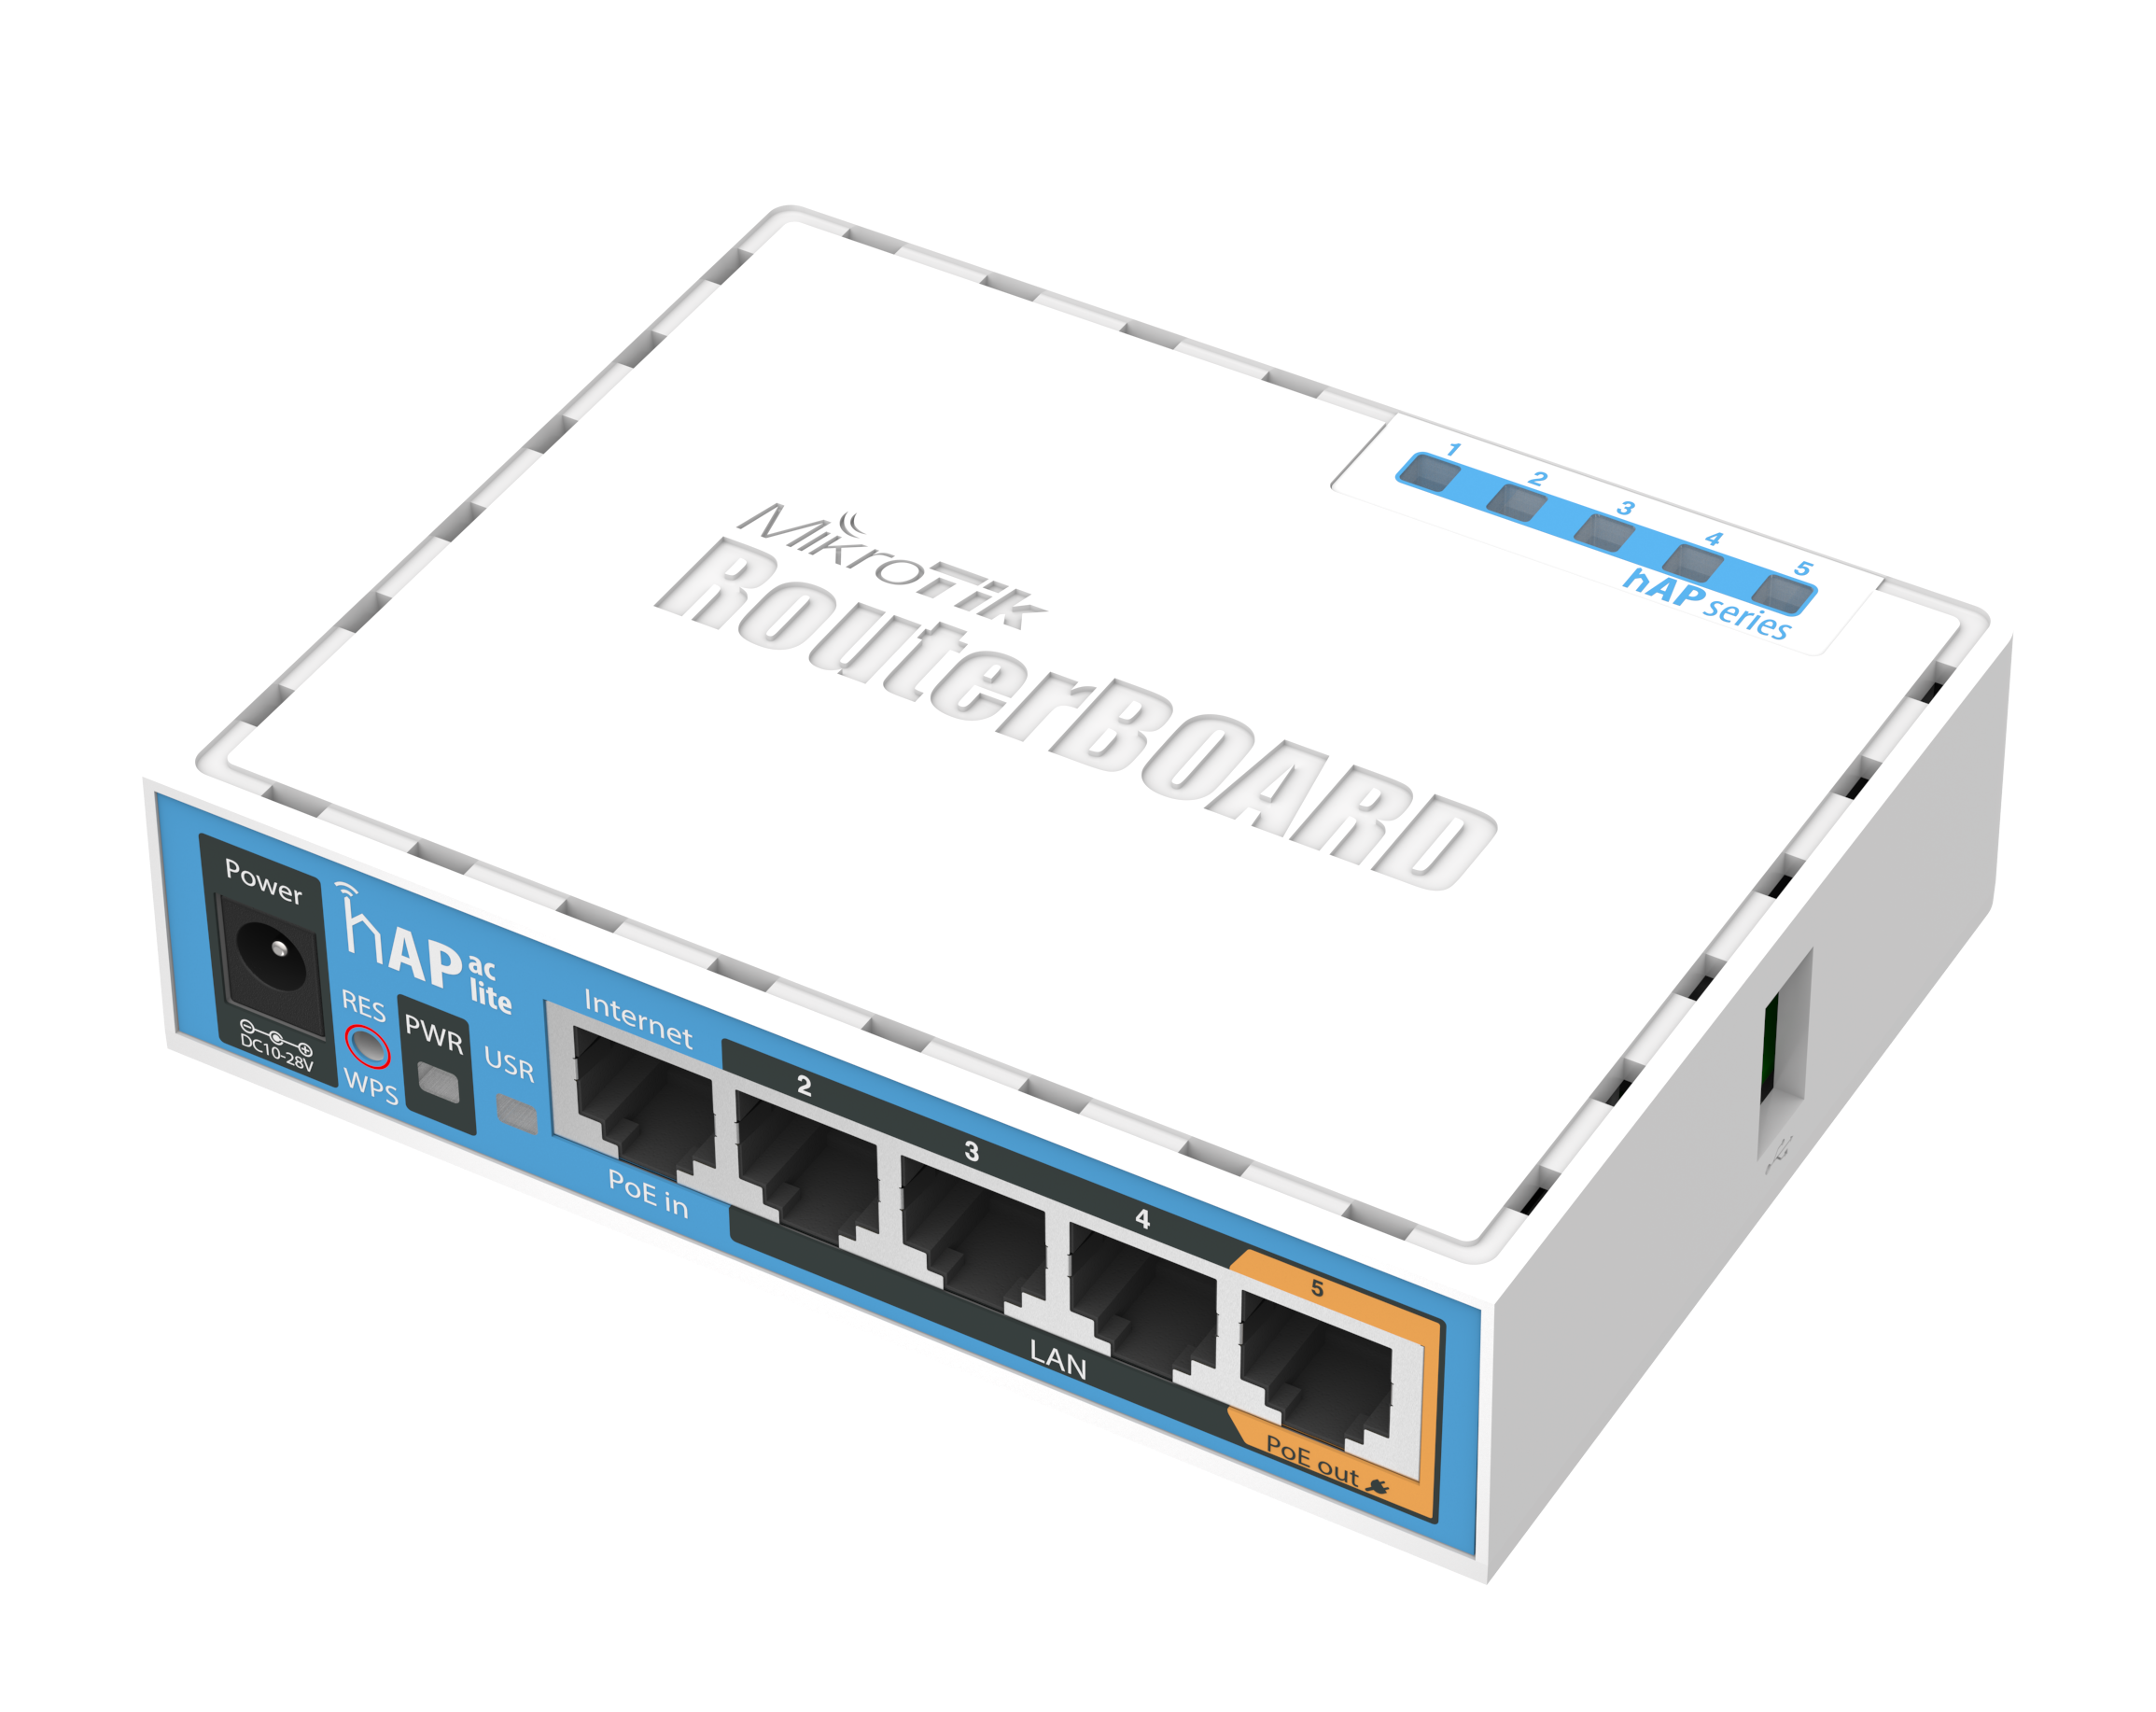 MikroTik Routers and Wireless - Products: hAP ac lite